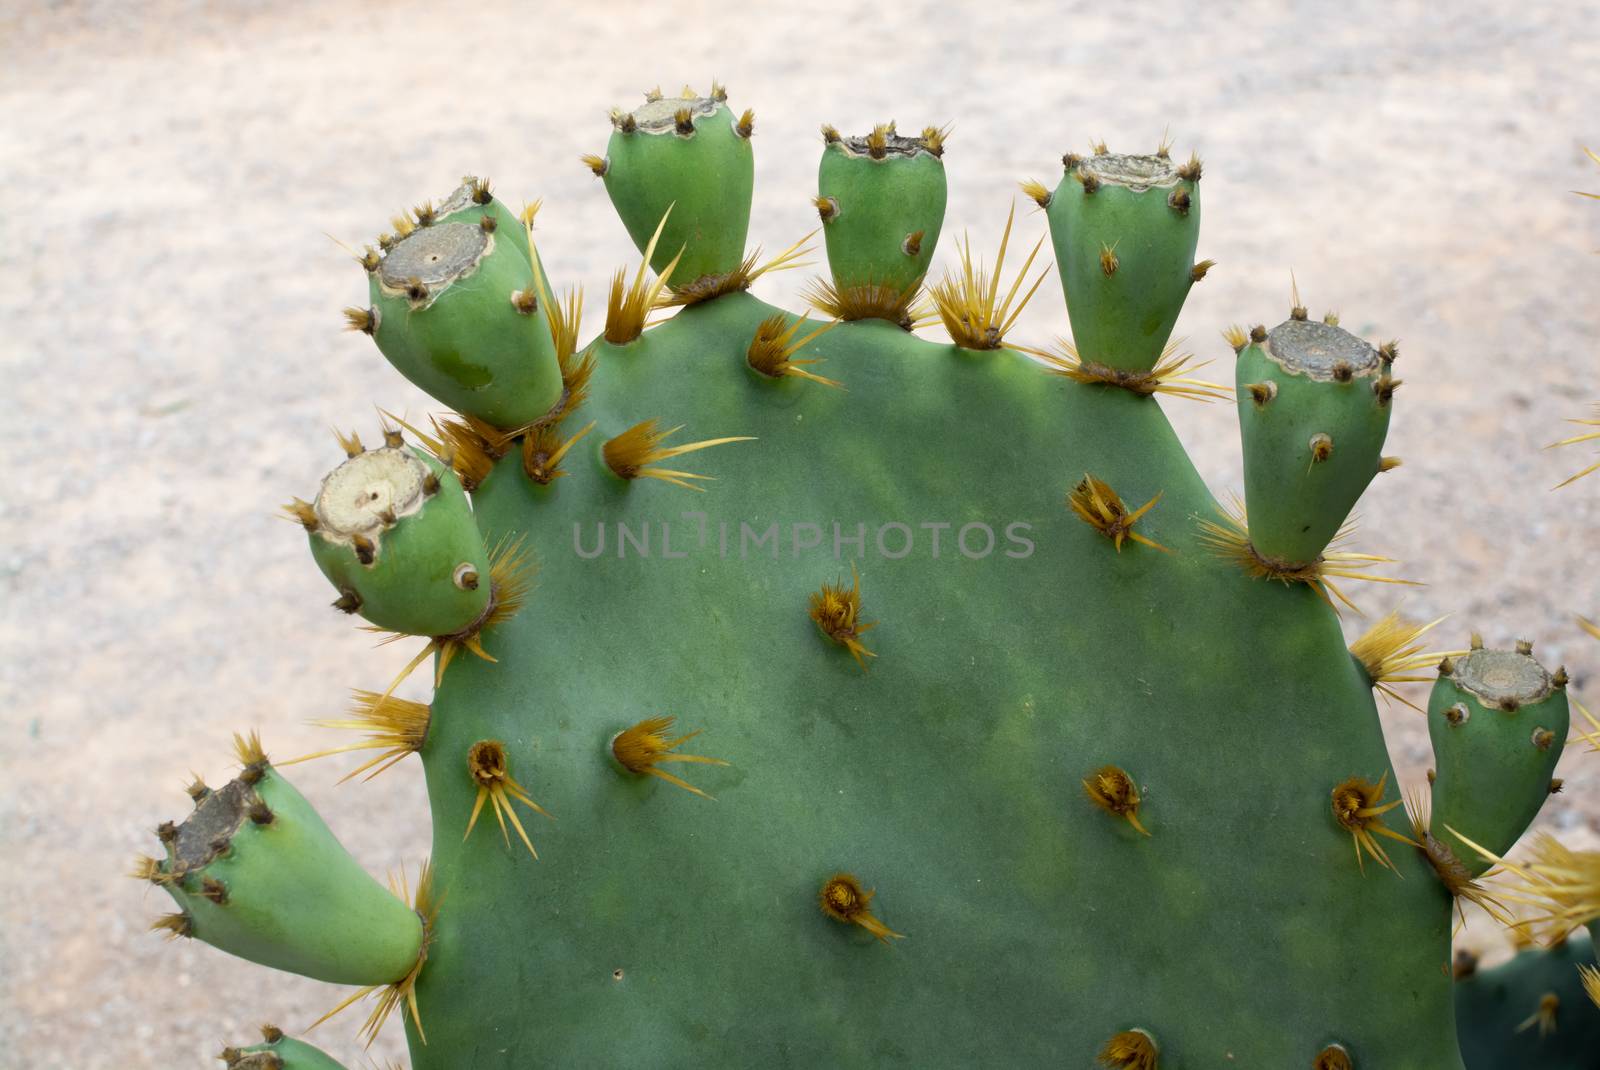 Cactus with green fruits by ArtesiaWells